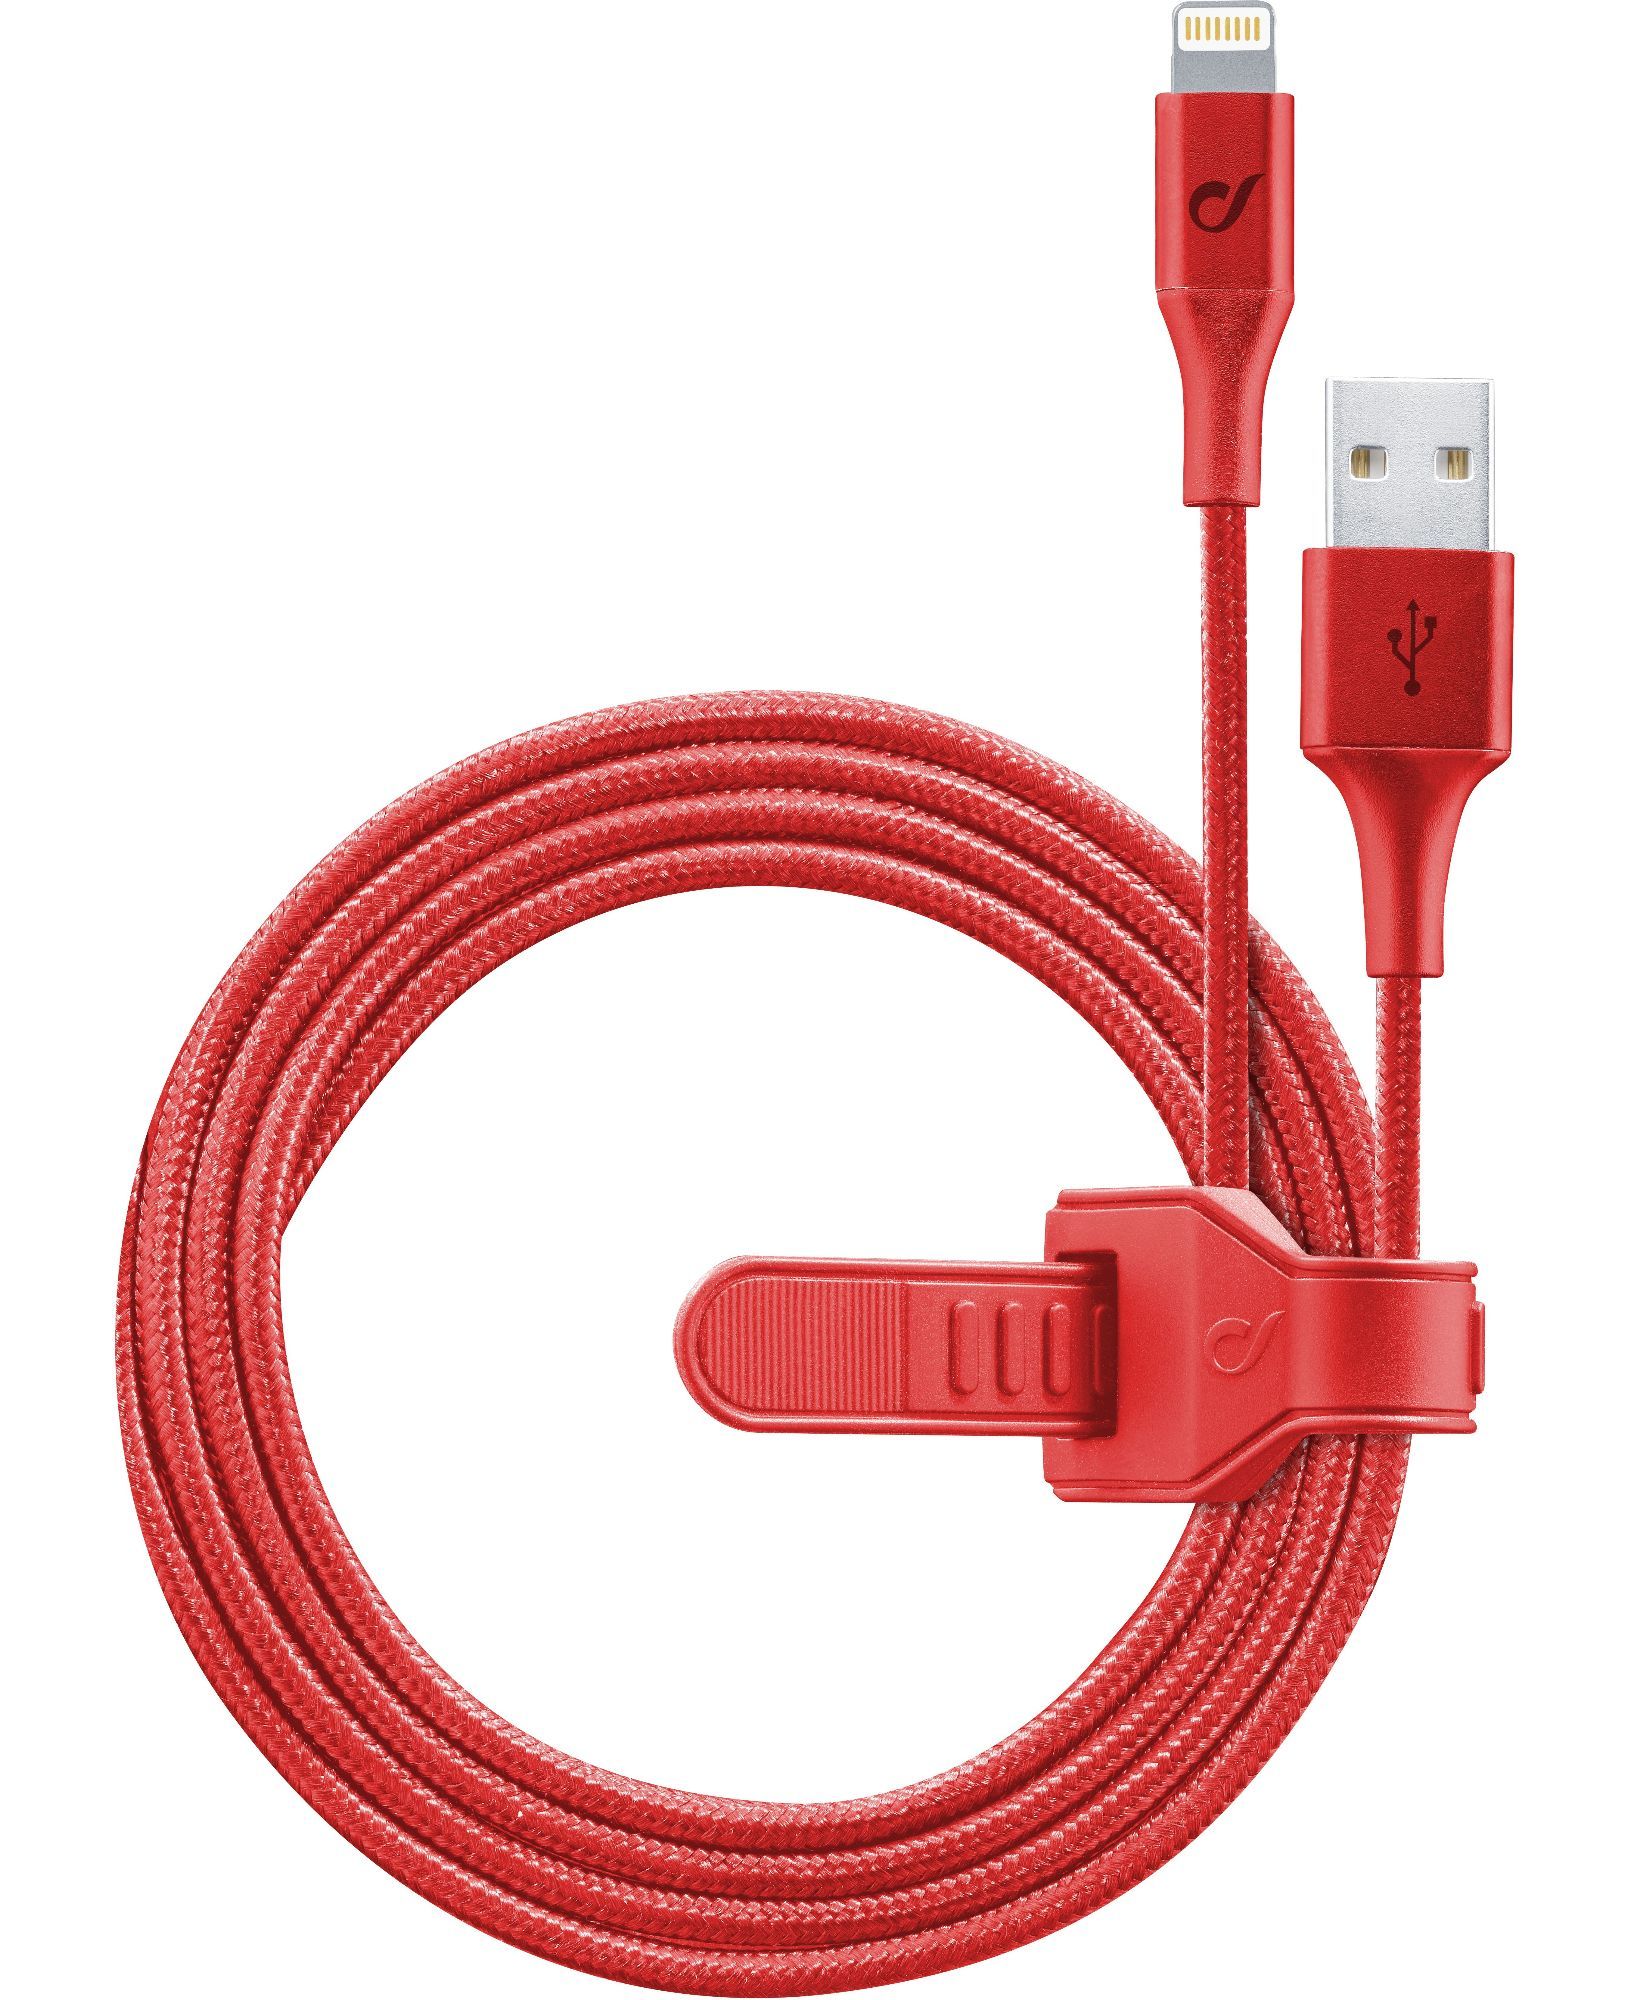 Usb cable, Apple lightning silicone strap, supernova red